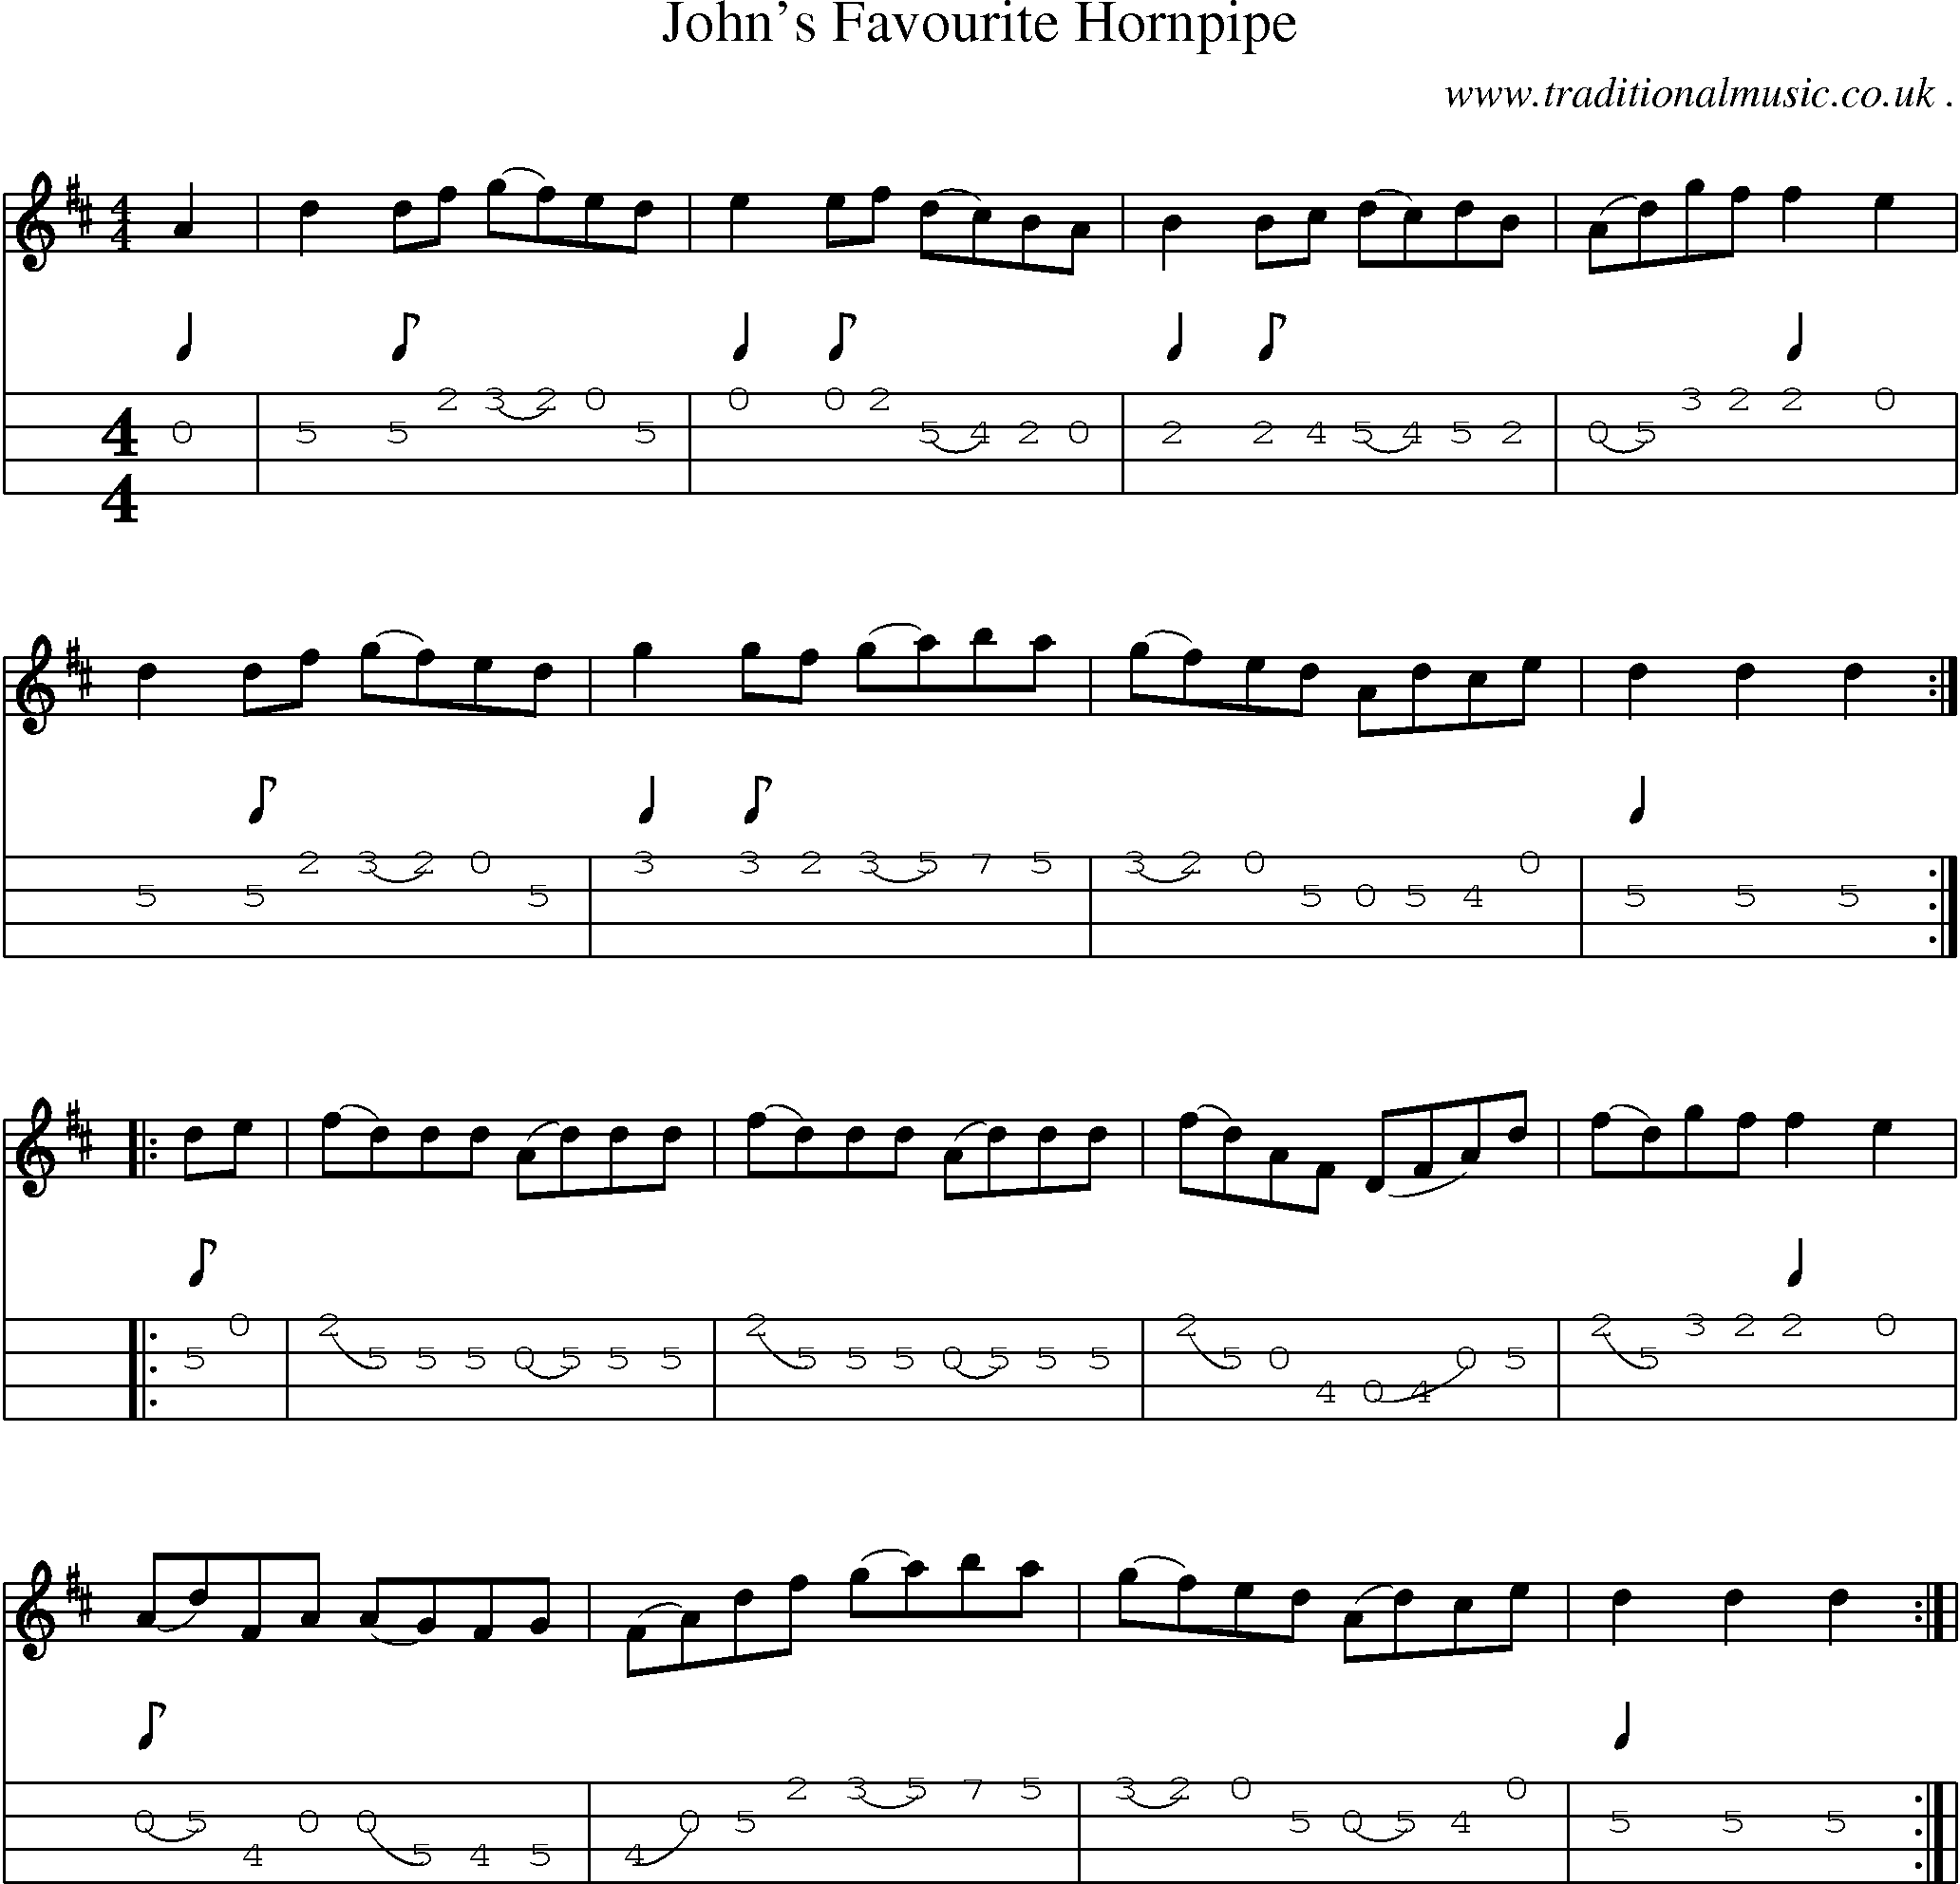 Sheet-Music and Mandolin Tabs for Johns Favourite Hornpipe